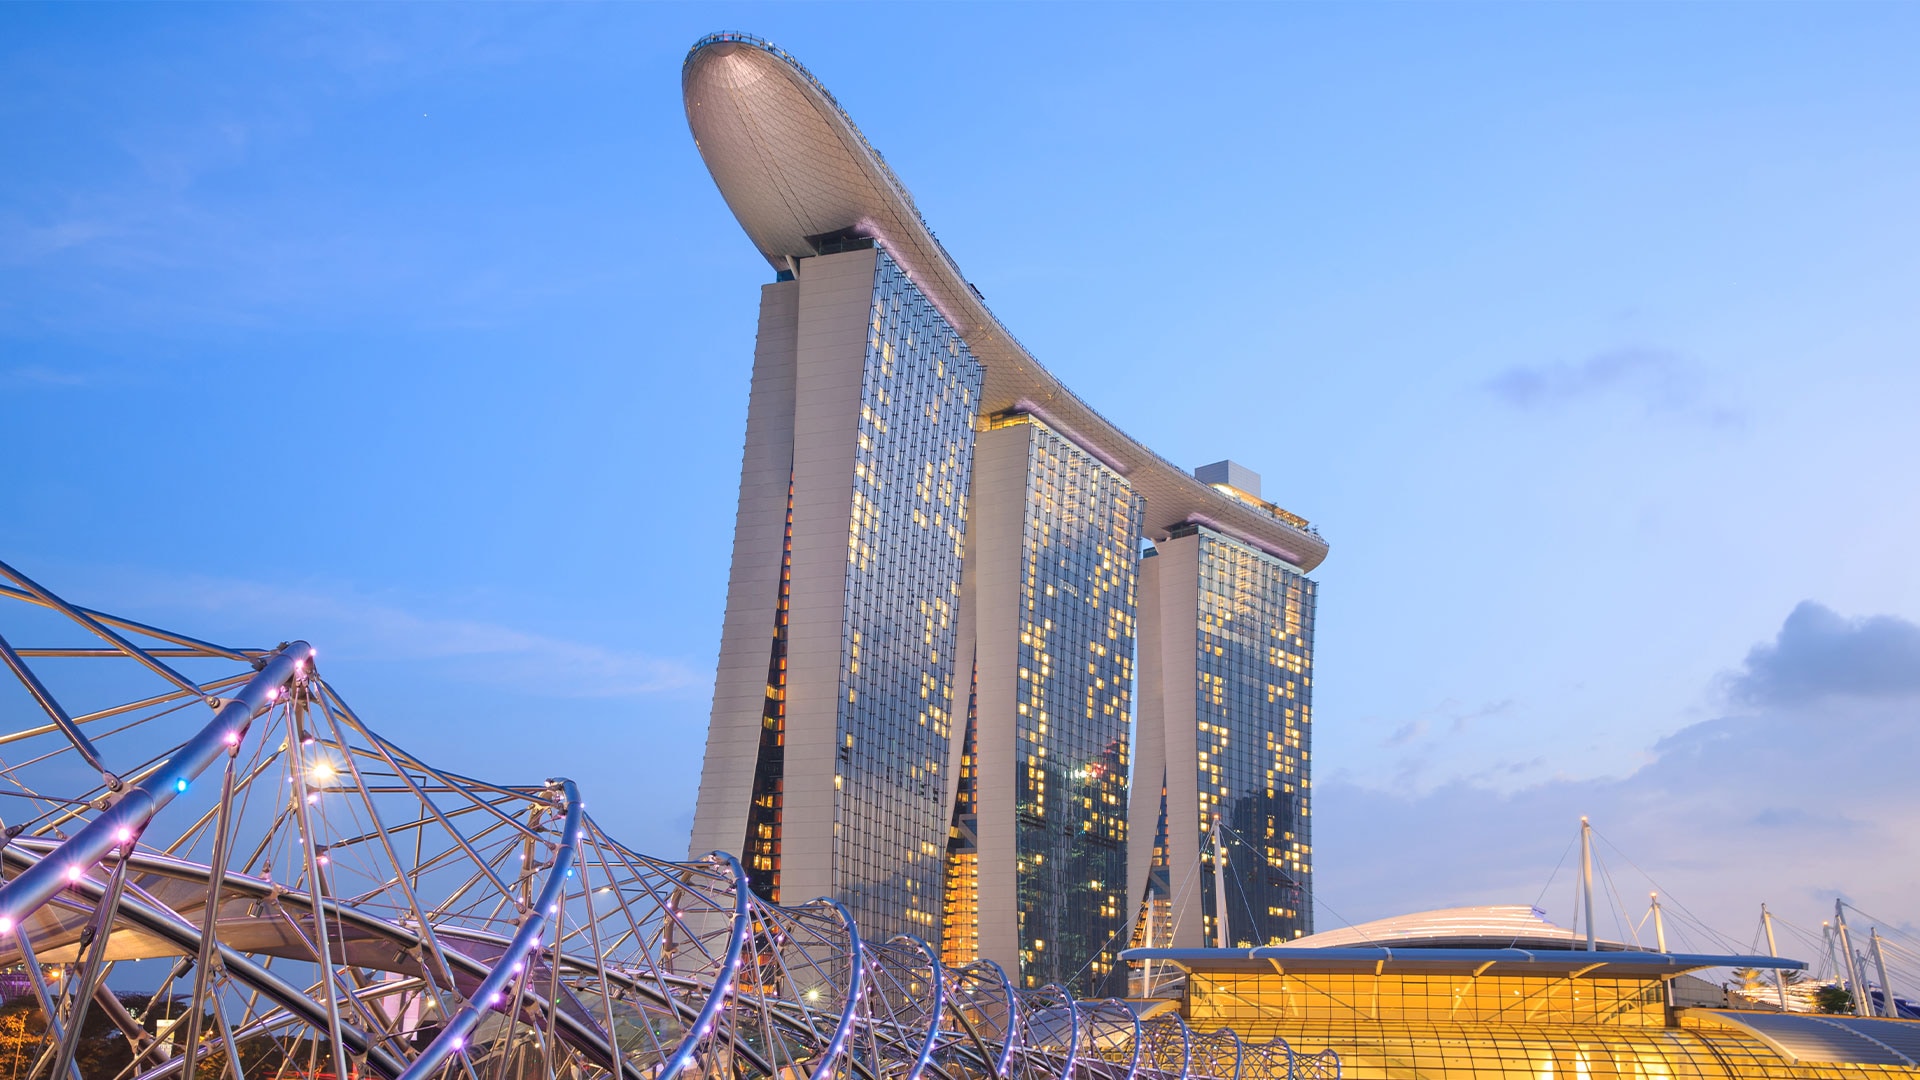 Marina Bay Sands, a popular attraction in Singapore with unlimited unique experiences